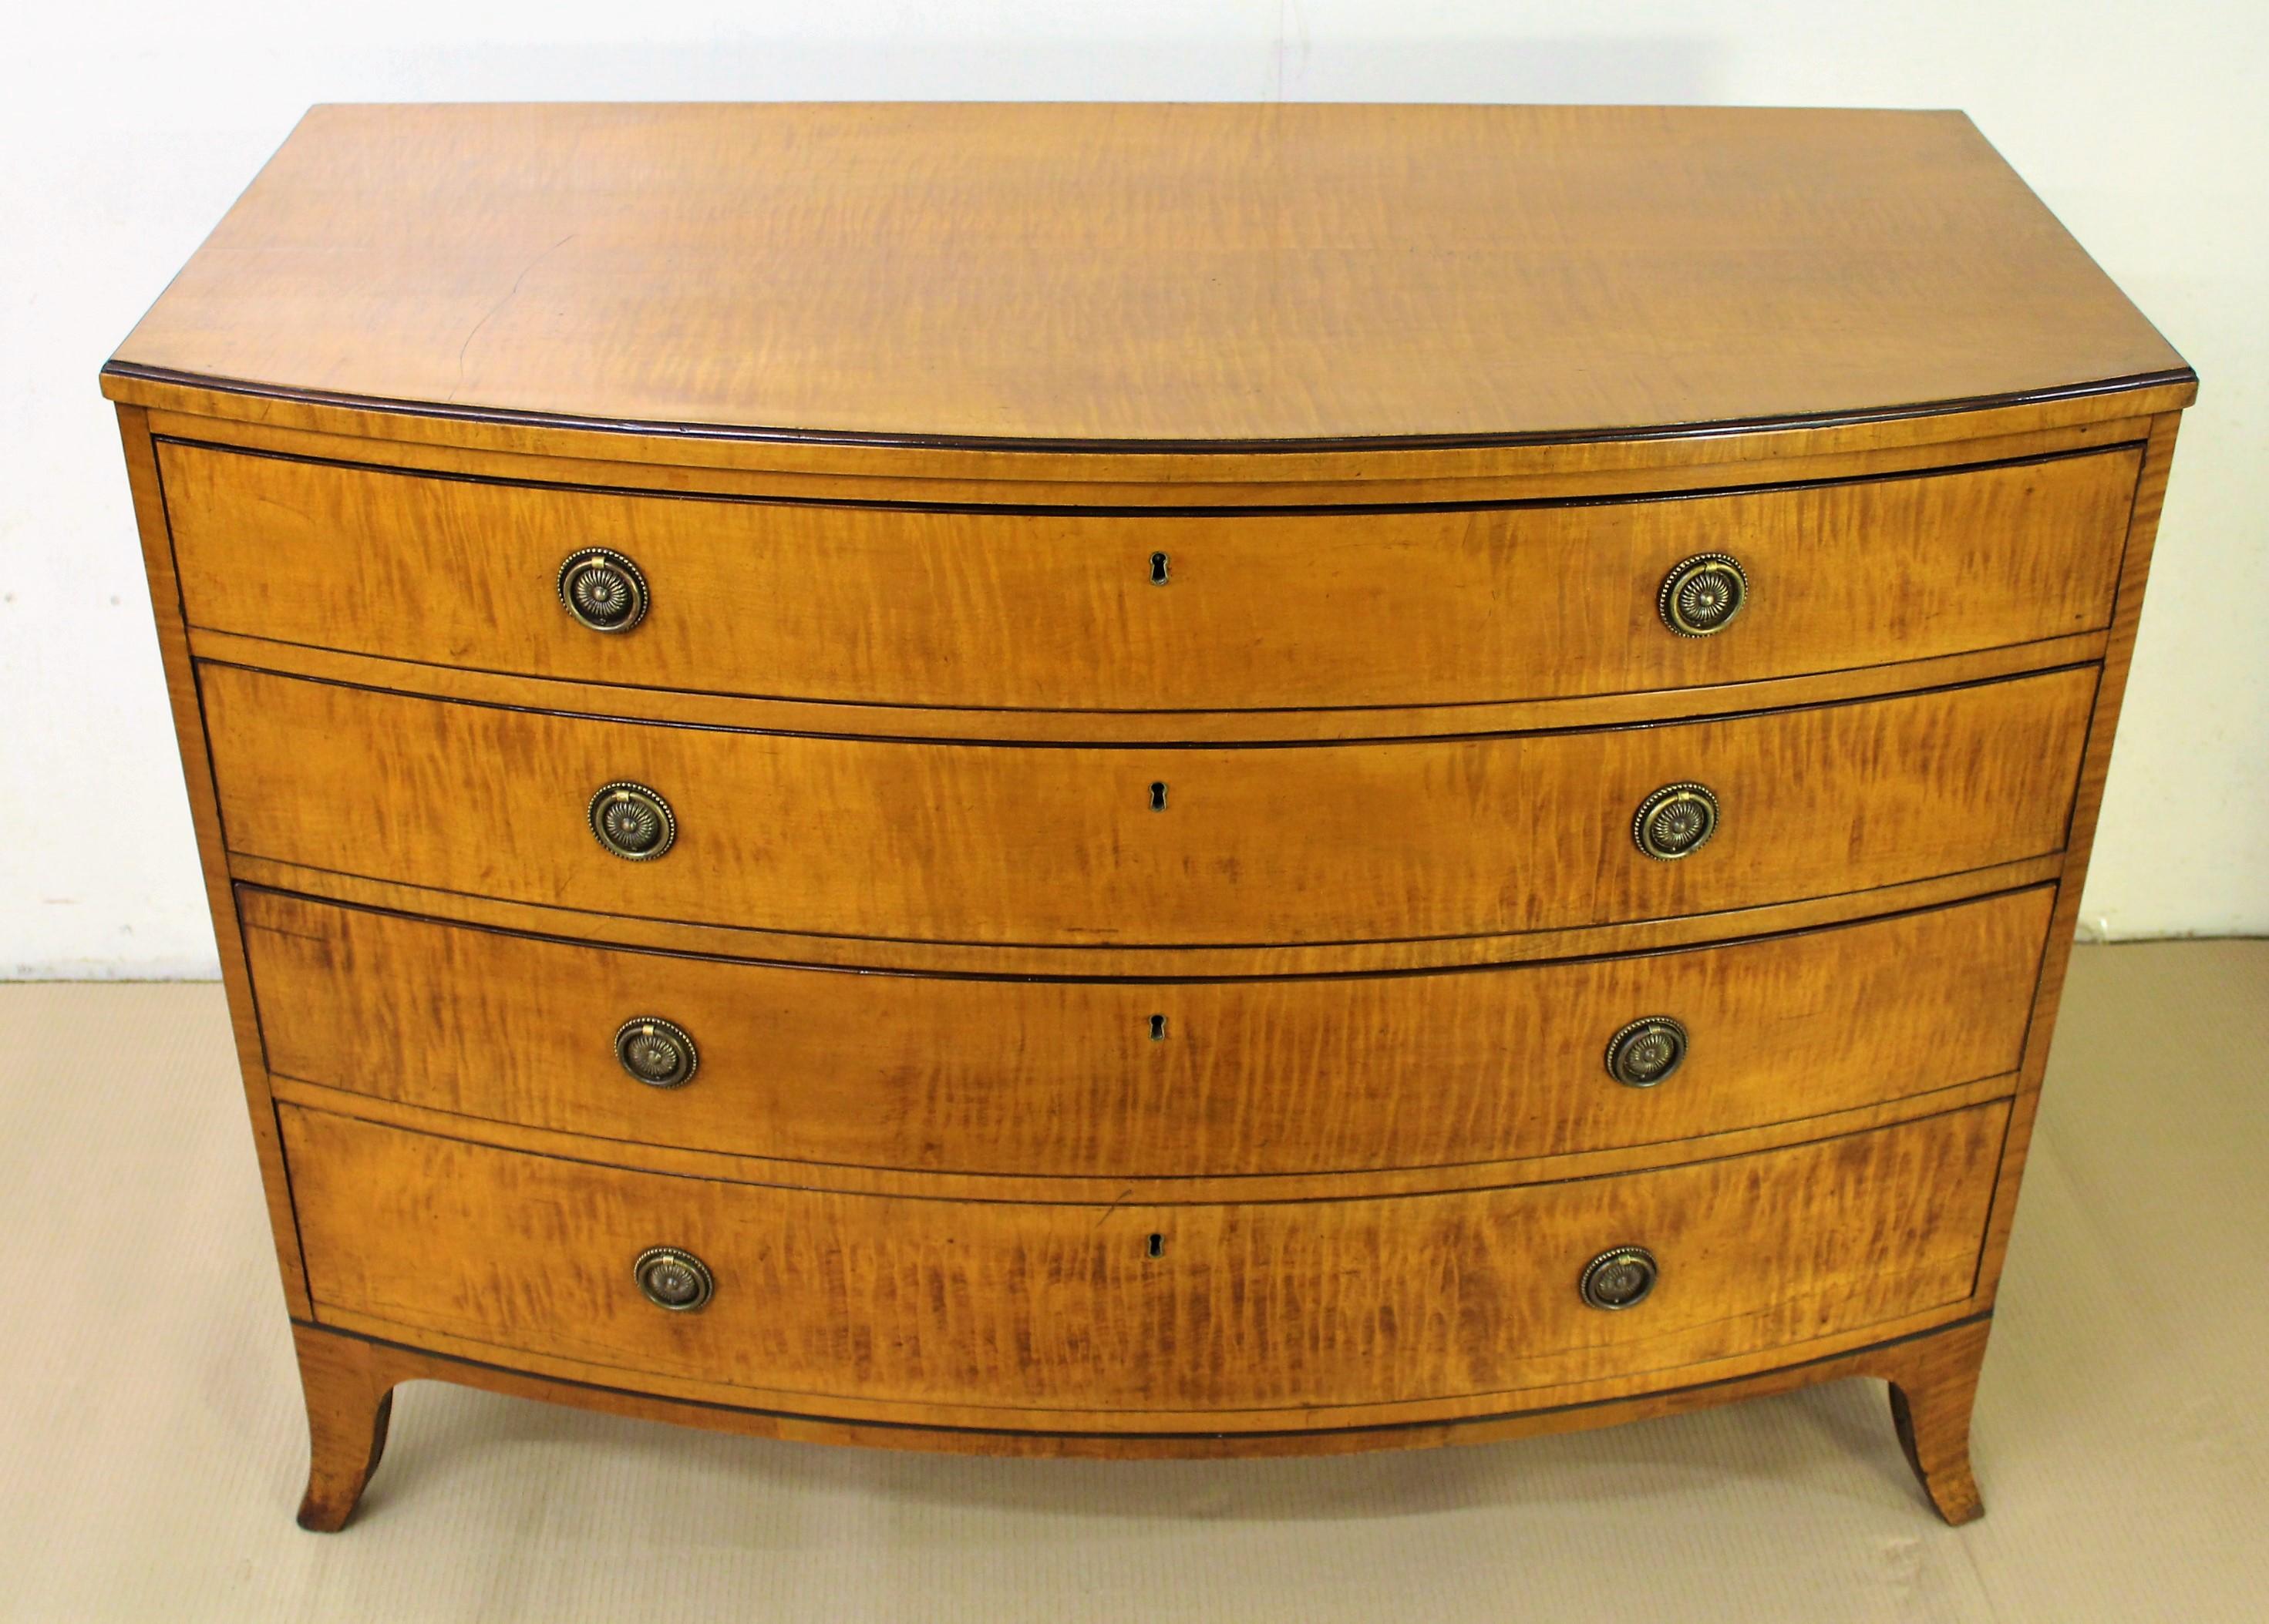 English George III Satinwood Bow Fronted Chest Commode, circa 1790 (George III.)